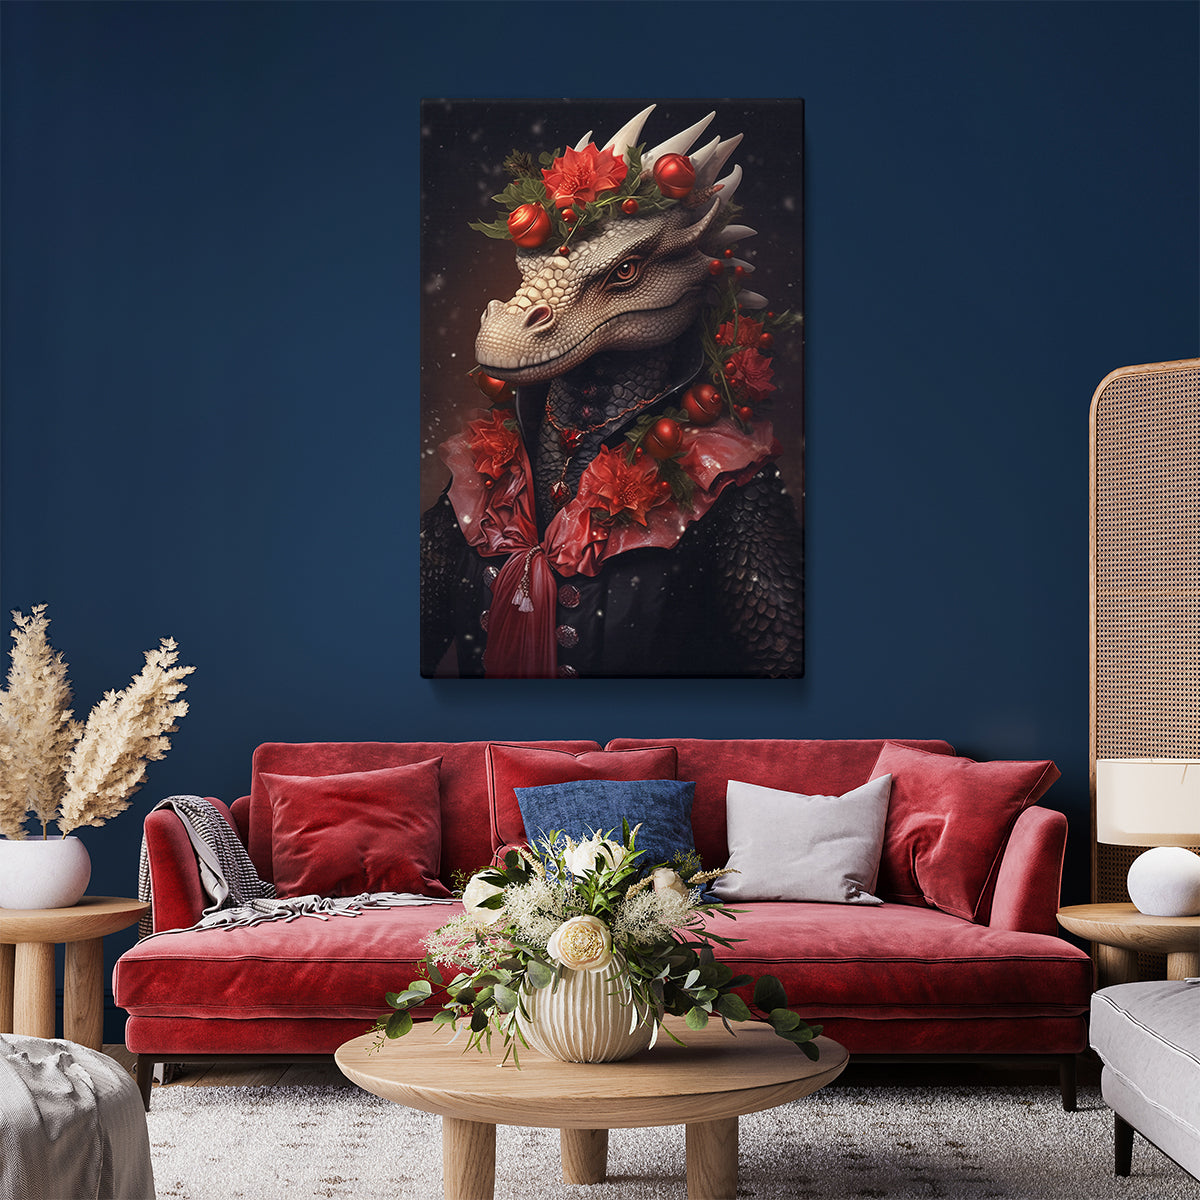 Festive Dragon Portrait, Holiday Fantasy Decor, Mythical Beast Ideal Gift for Fantasy Lovers Abstract Art Print Artesty 1 Panel 24"x36" 